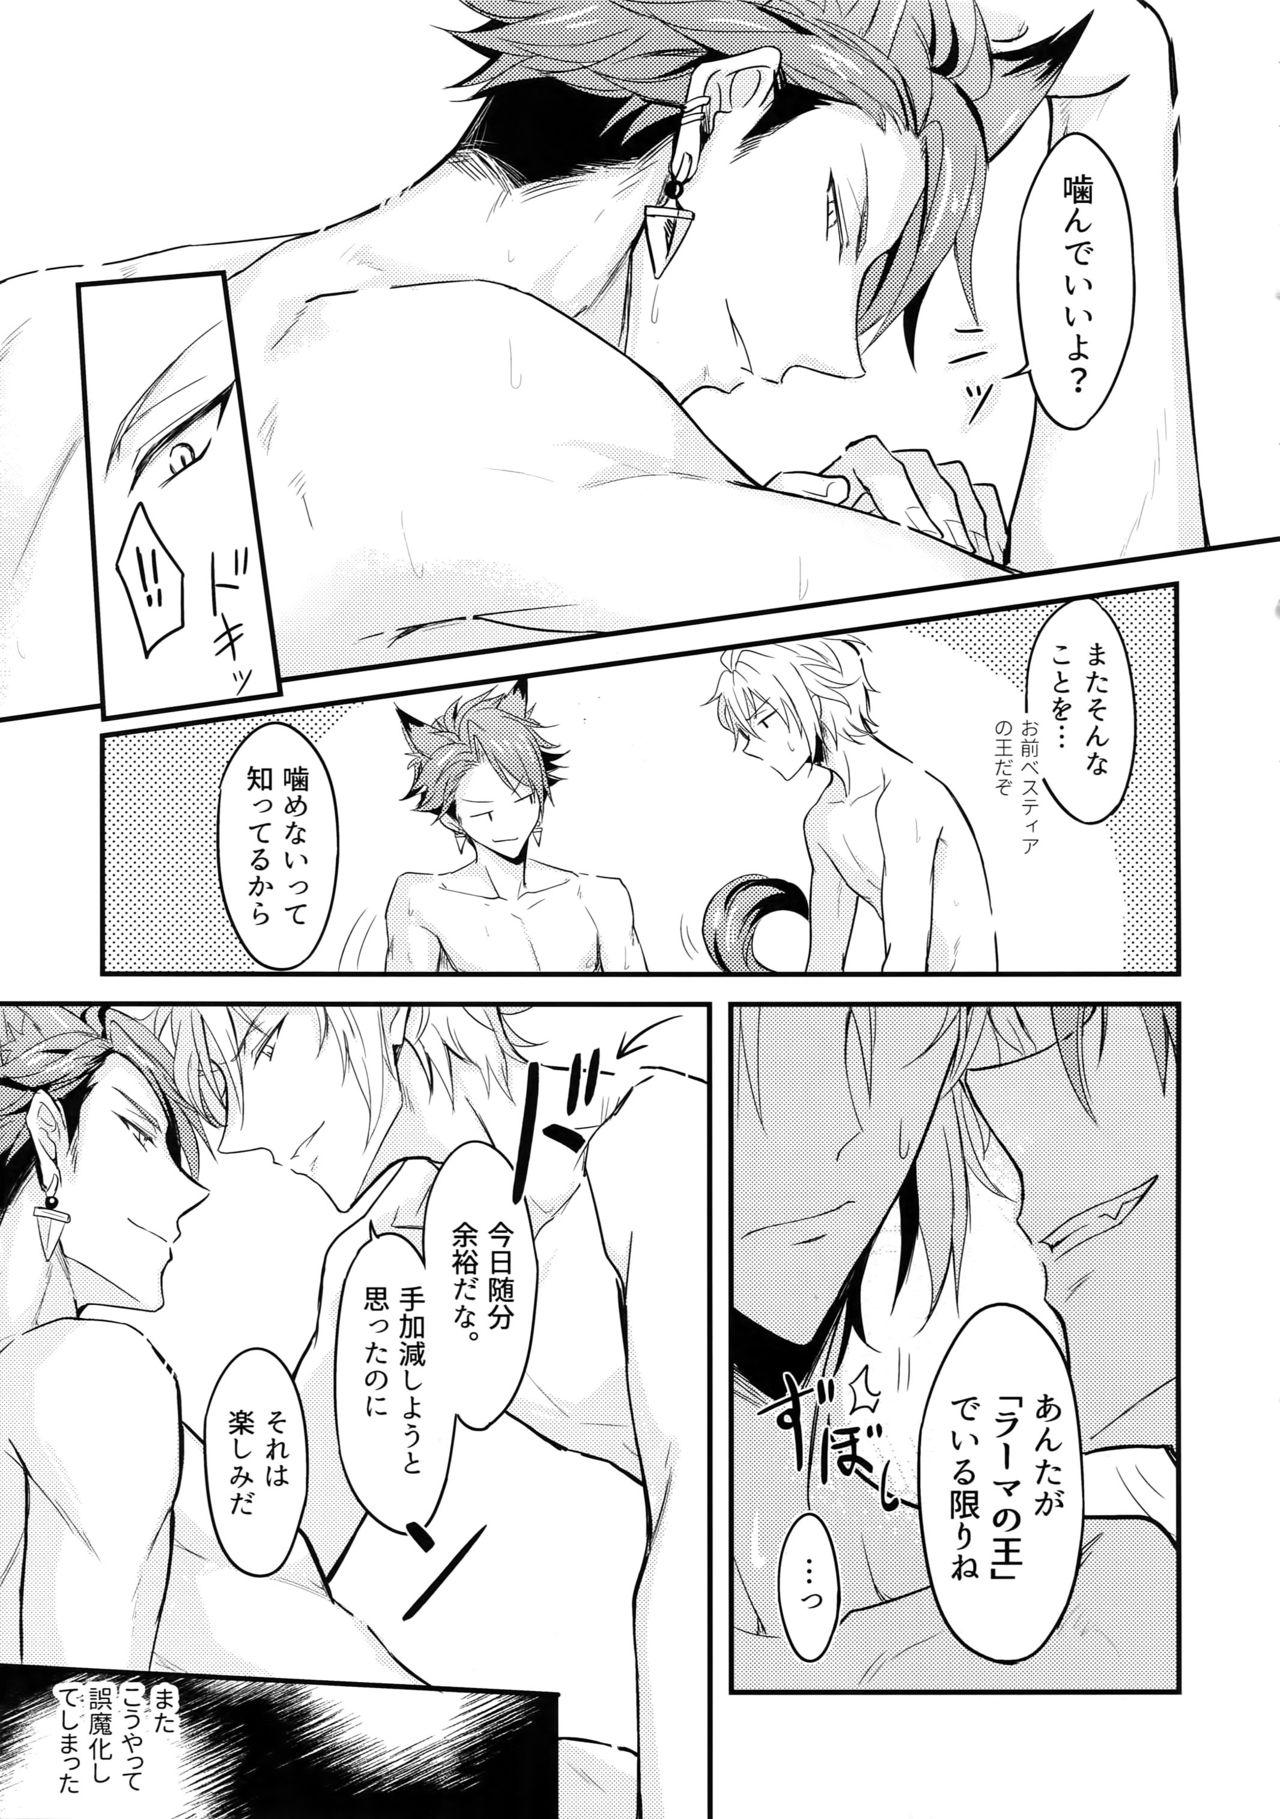 Delicia Top Secret - Idolish7 Teasing - Page 10